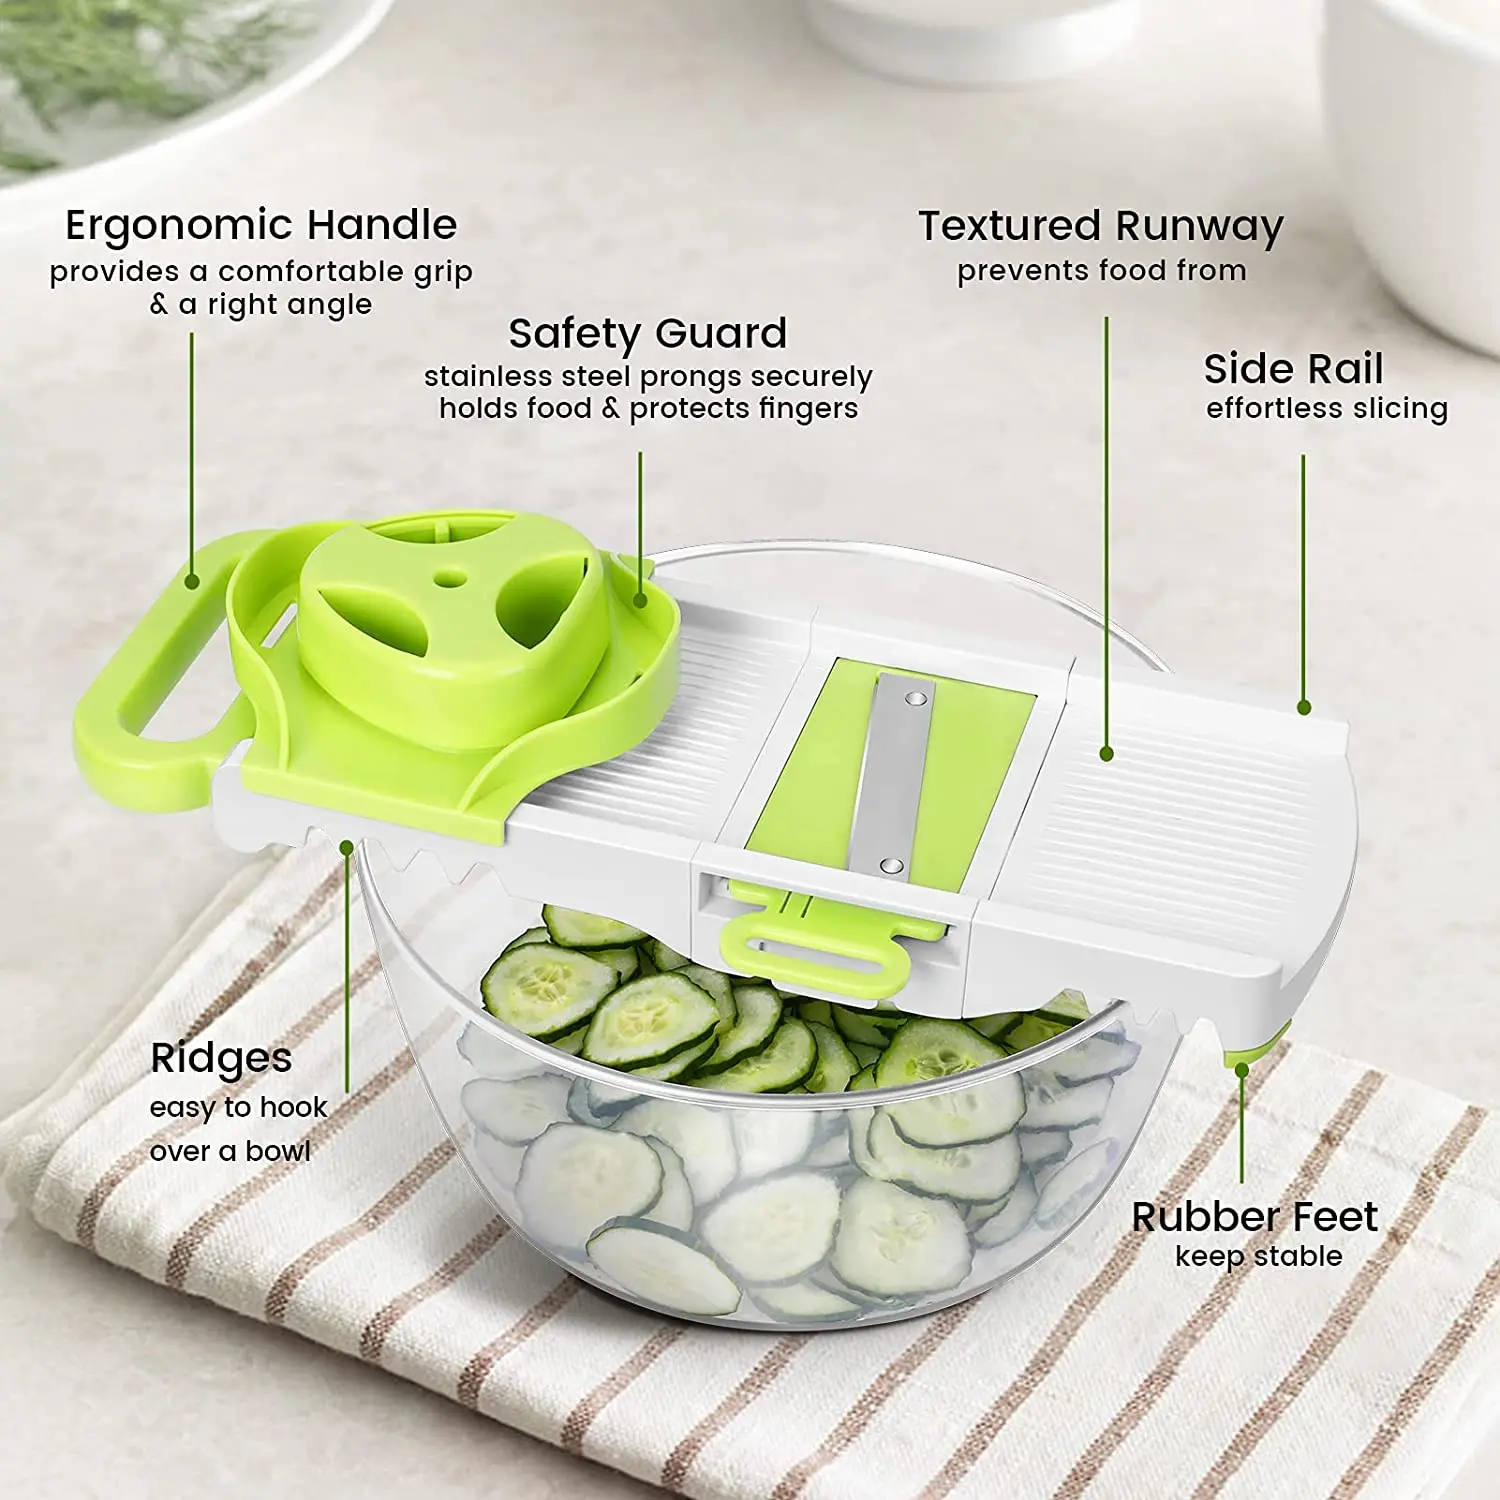 Dropship 6 In1 Stainless Steel Manual Vegetable Slicer Potato Cutter  Mandoline Kitchen to Sell Online at a Lower Price